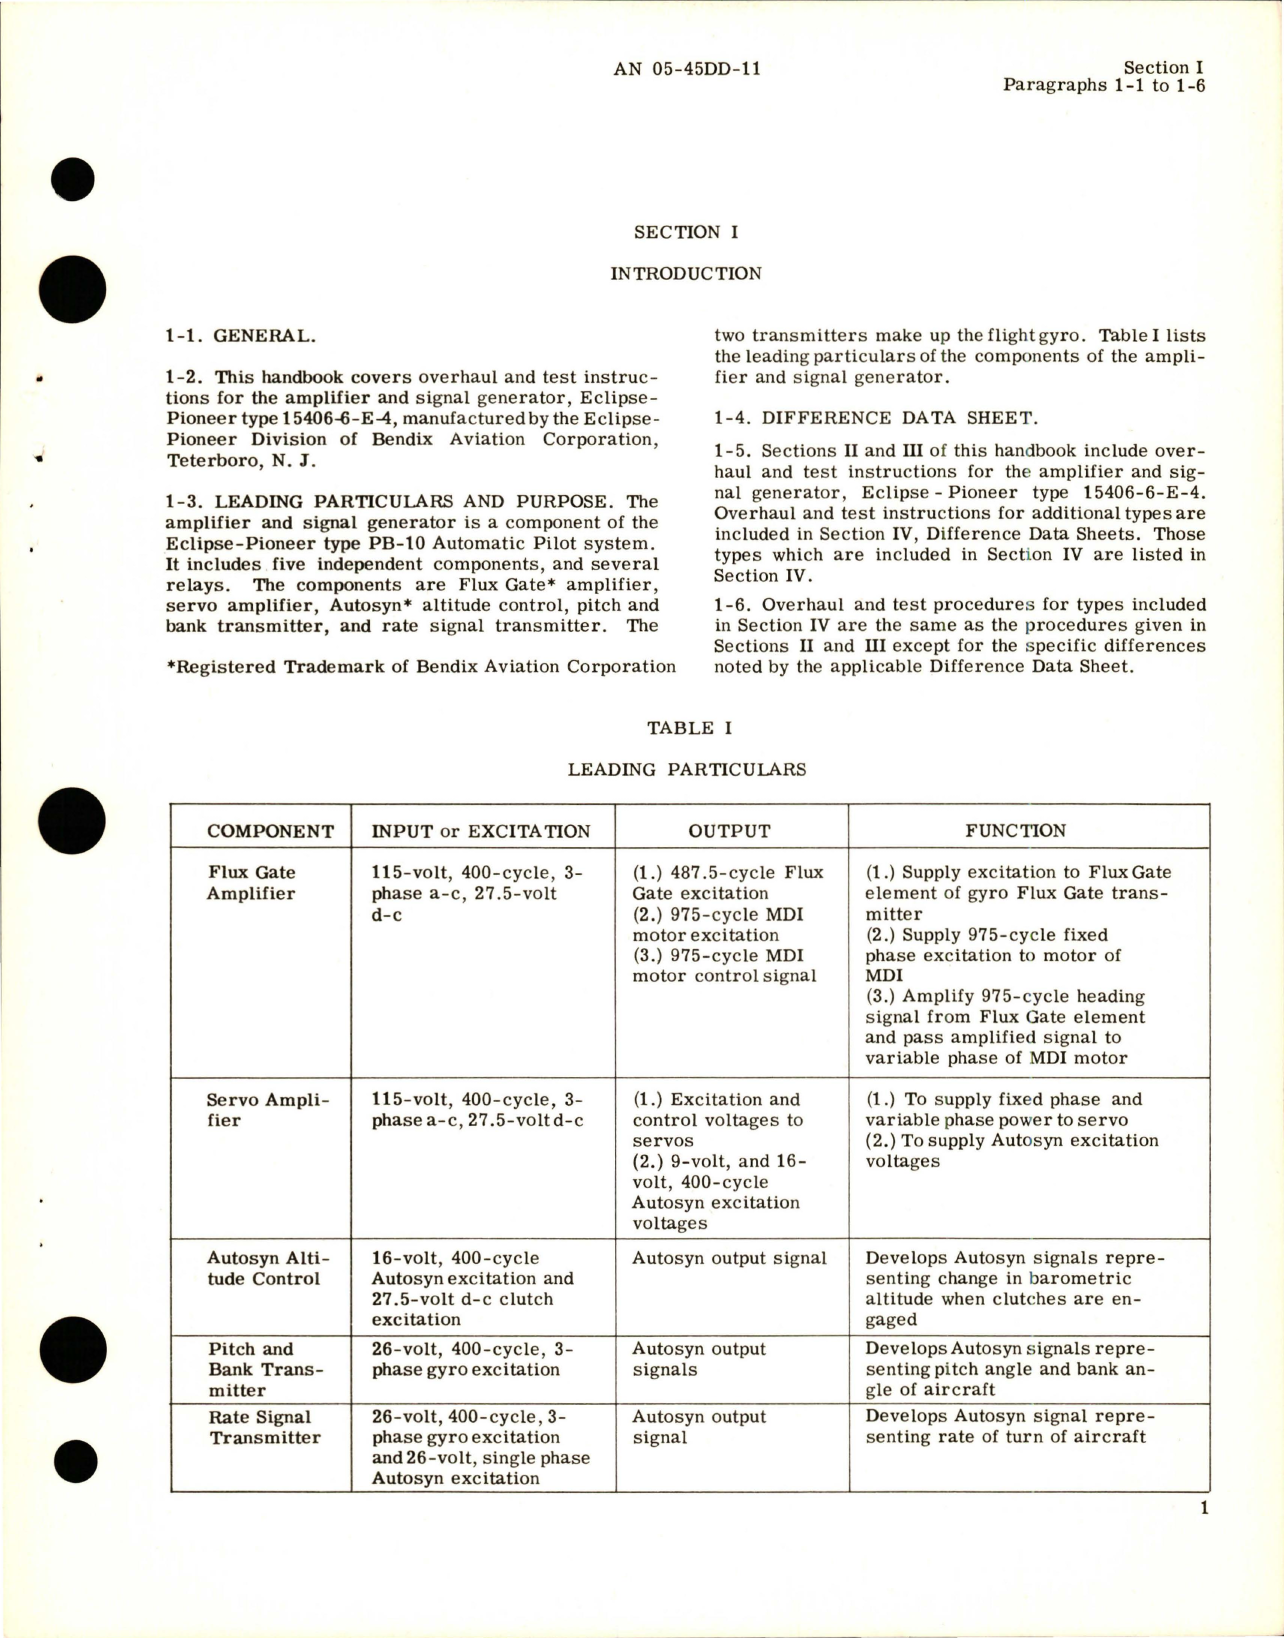 Sample page 5 from AirCorps Library document: Overhaul Instructions for Amplifier and Signal Generator - Parts 15406-6-C-4, 15406-6-D-4, 15406-6-E-4, and 15406-6-E-6